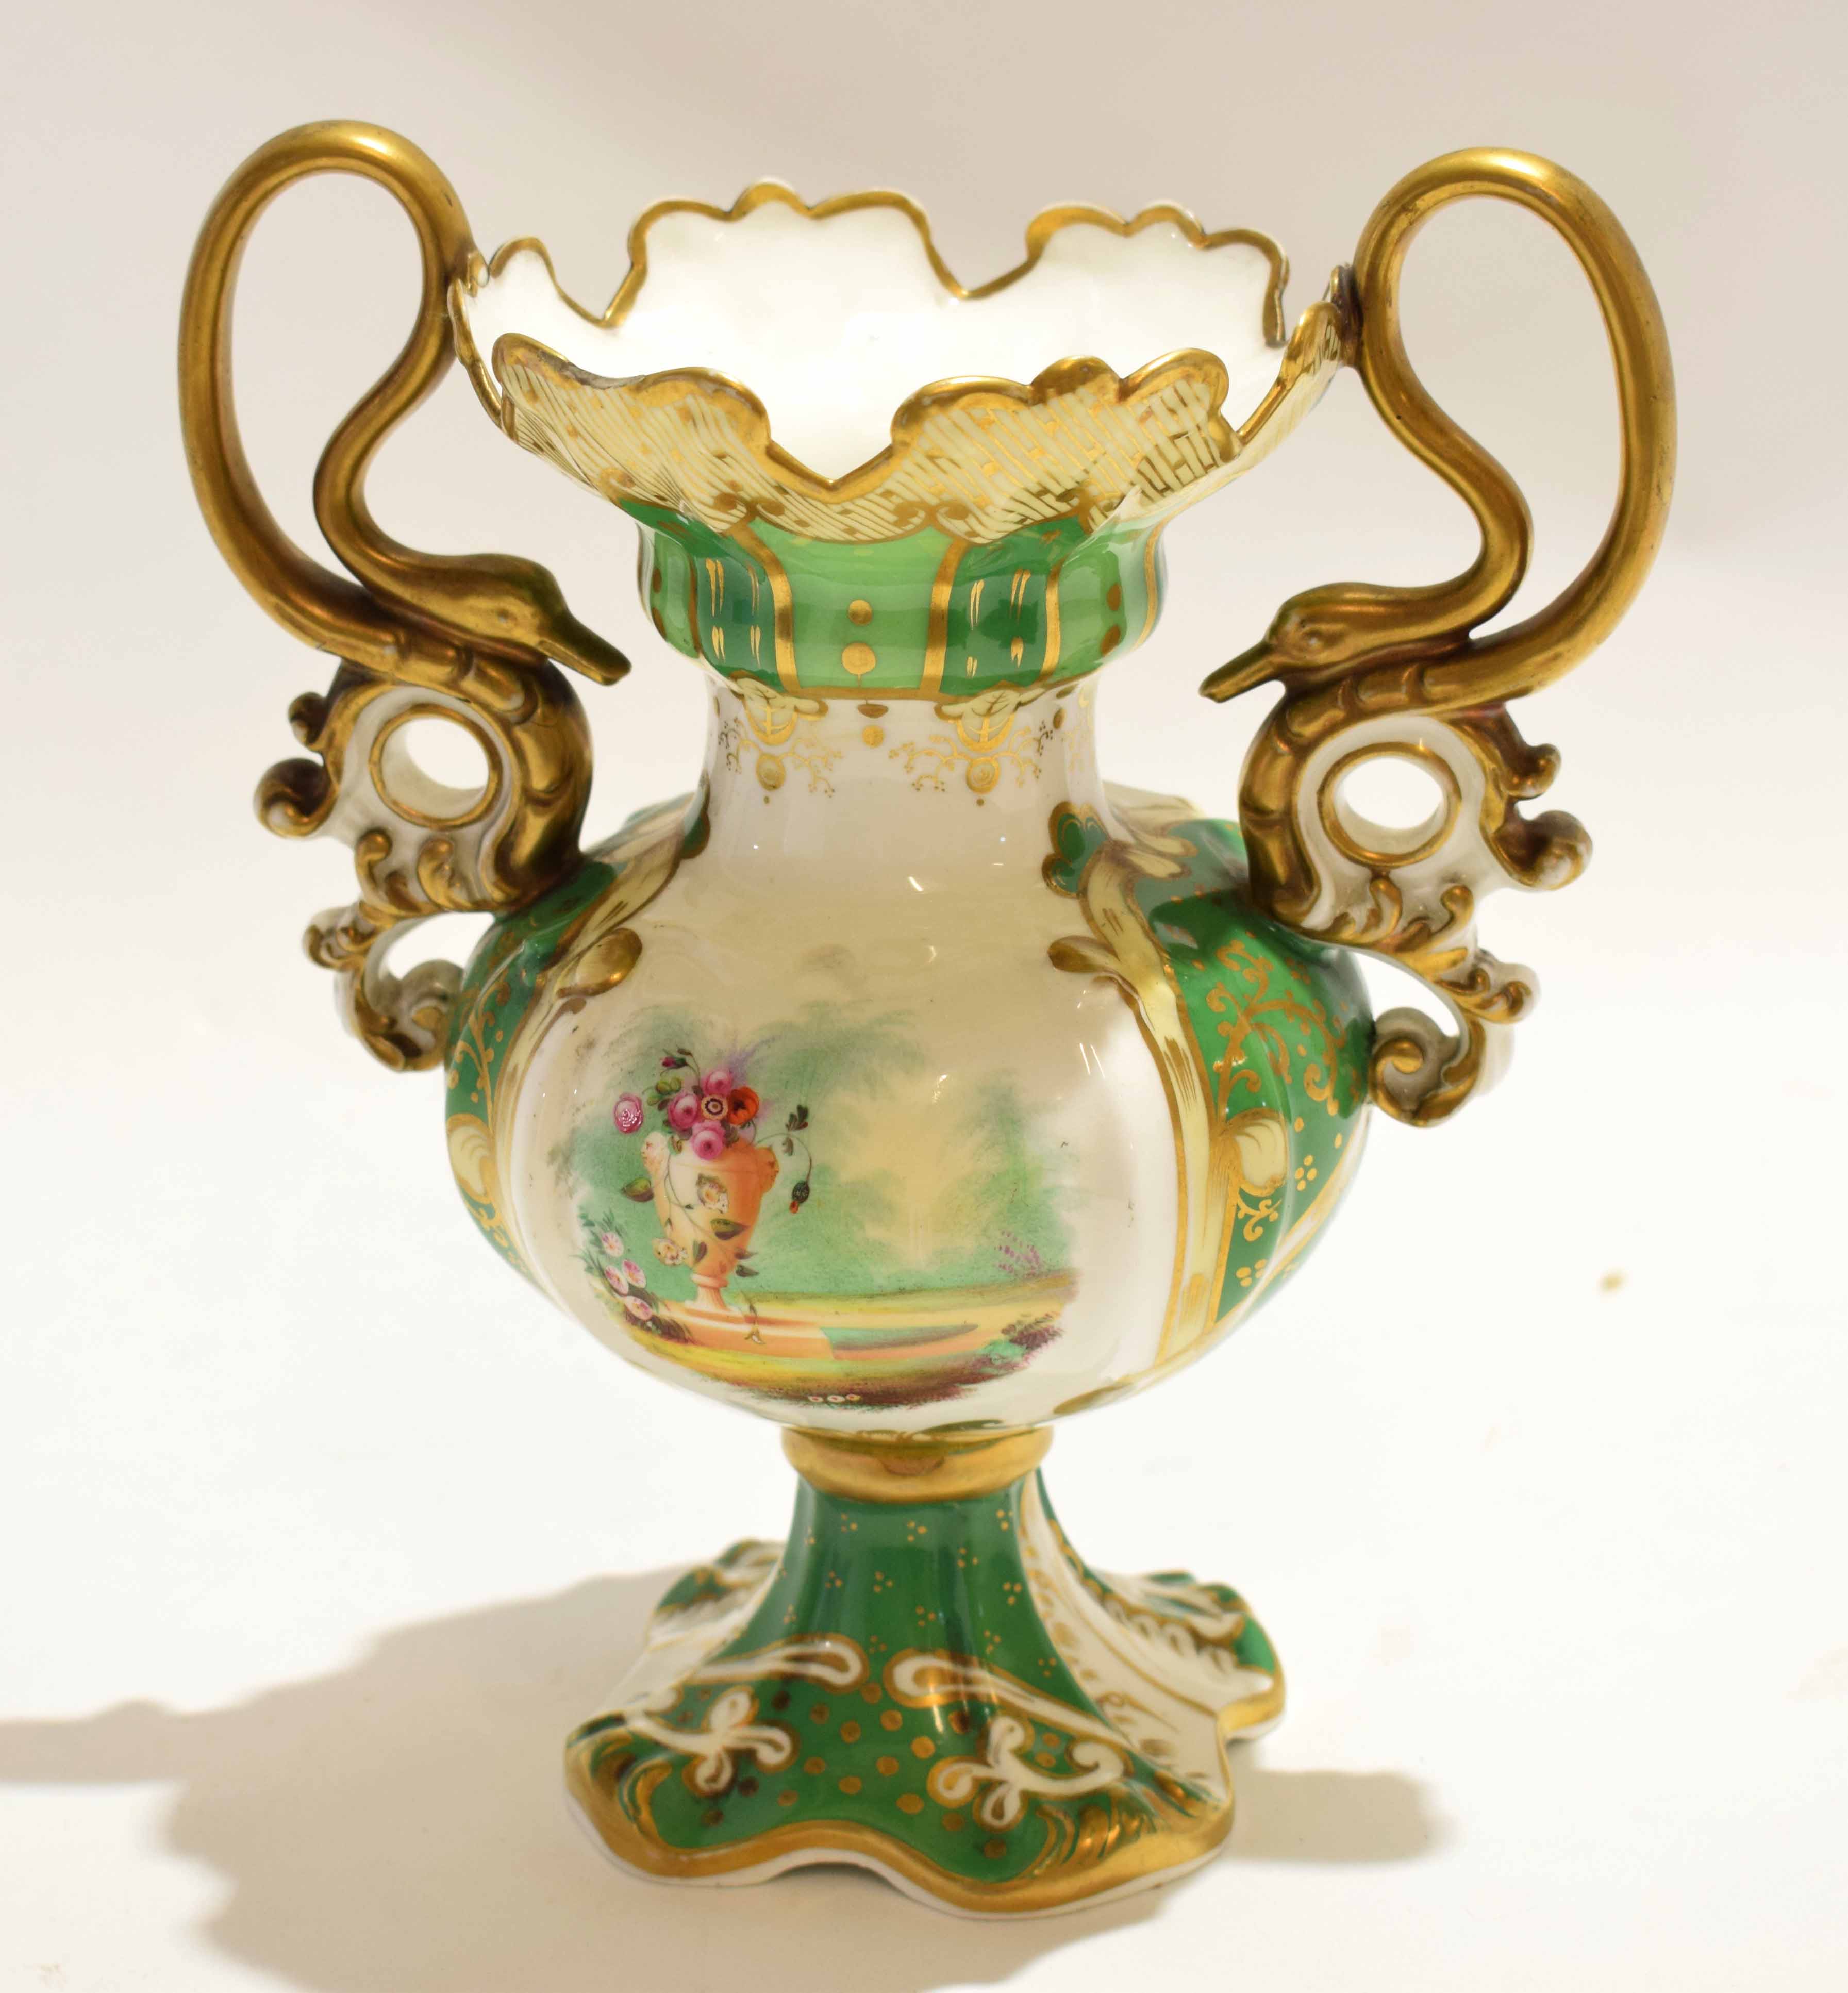 19th century Rockingham style English porcelain vase with two swan like handles and a painted